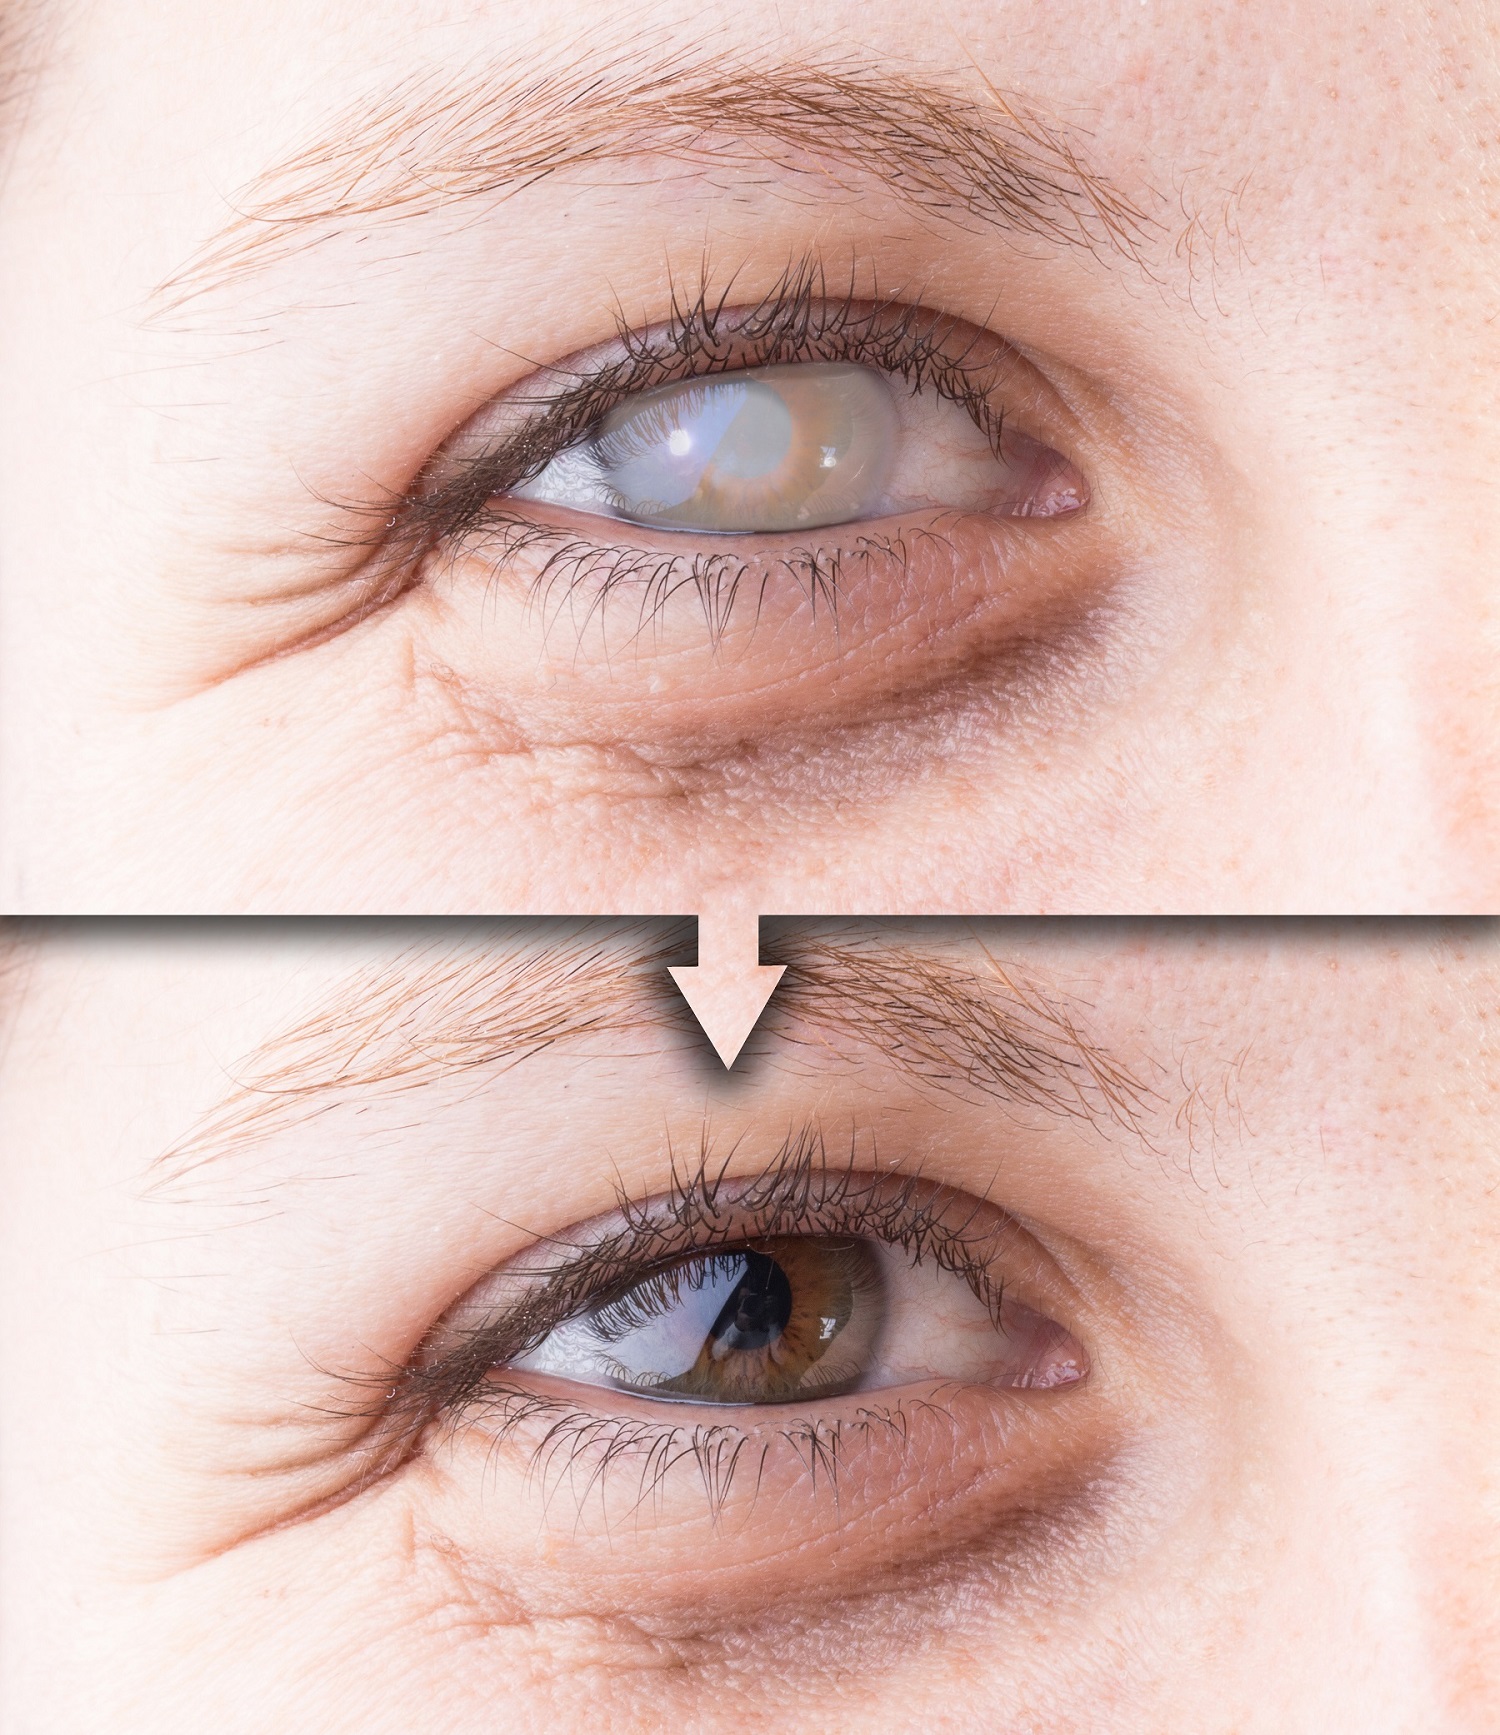 Eyes with and without cataract and corneal opacity